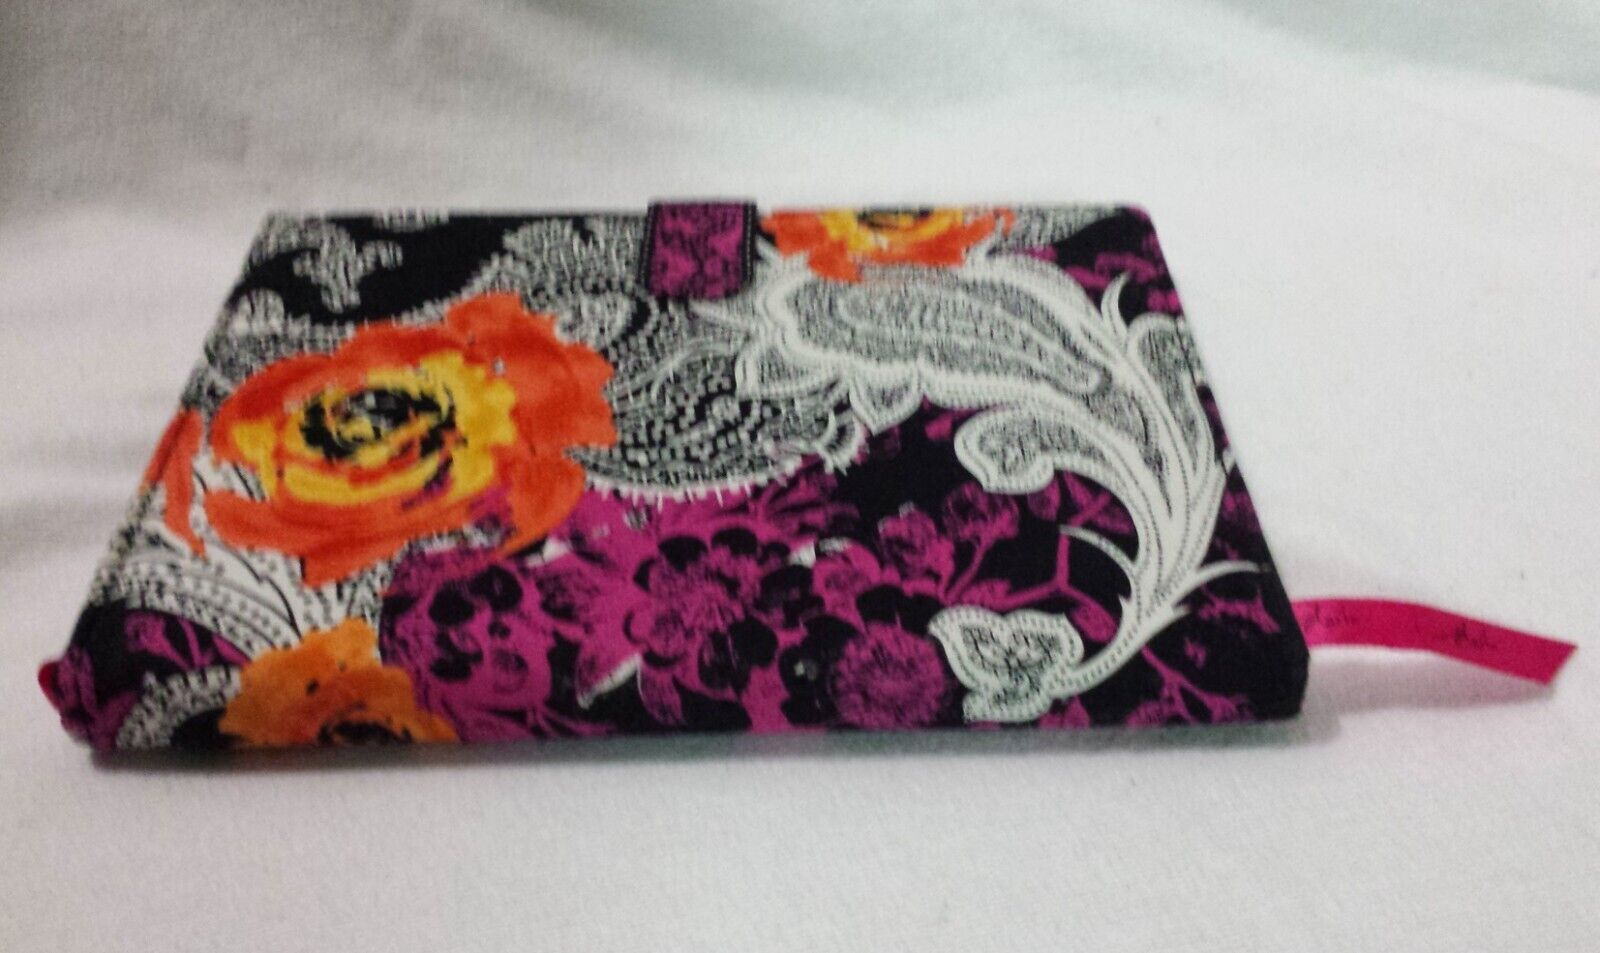 Fabric Cover Lined Journal Diary Notebk Orange Hot Pink Floral Paisley on Black 